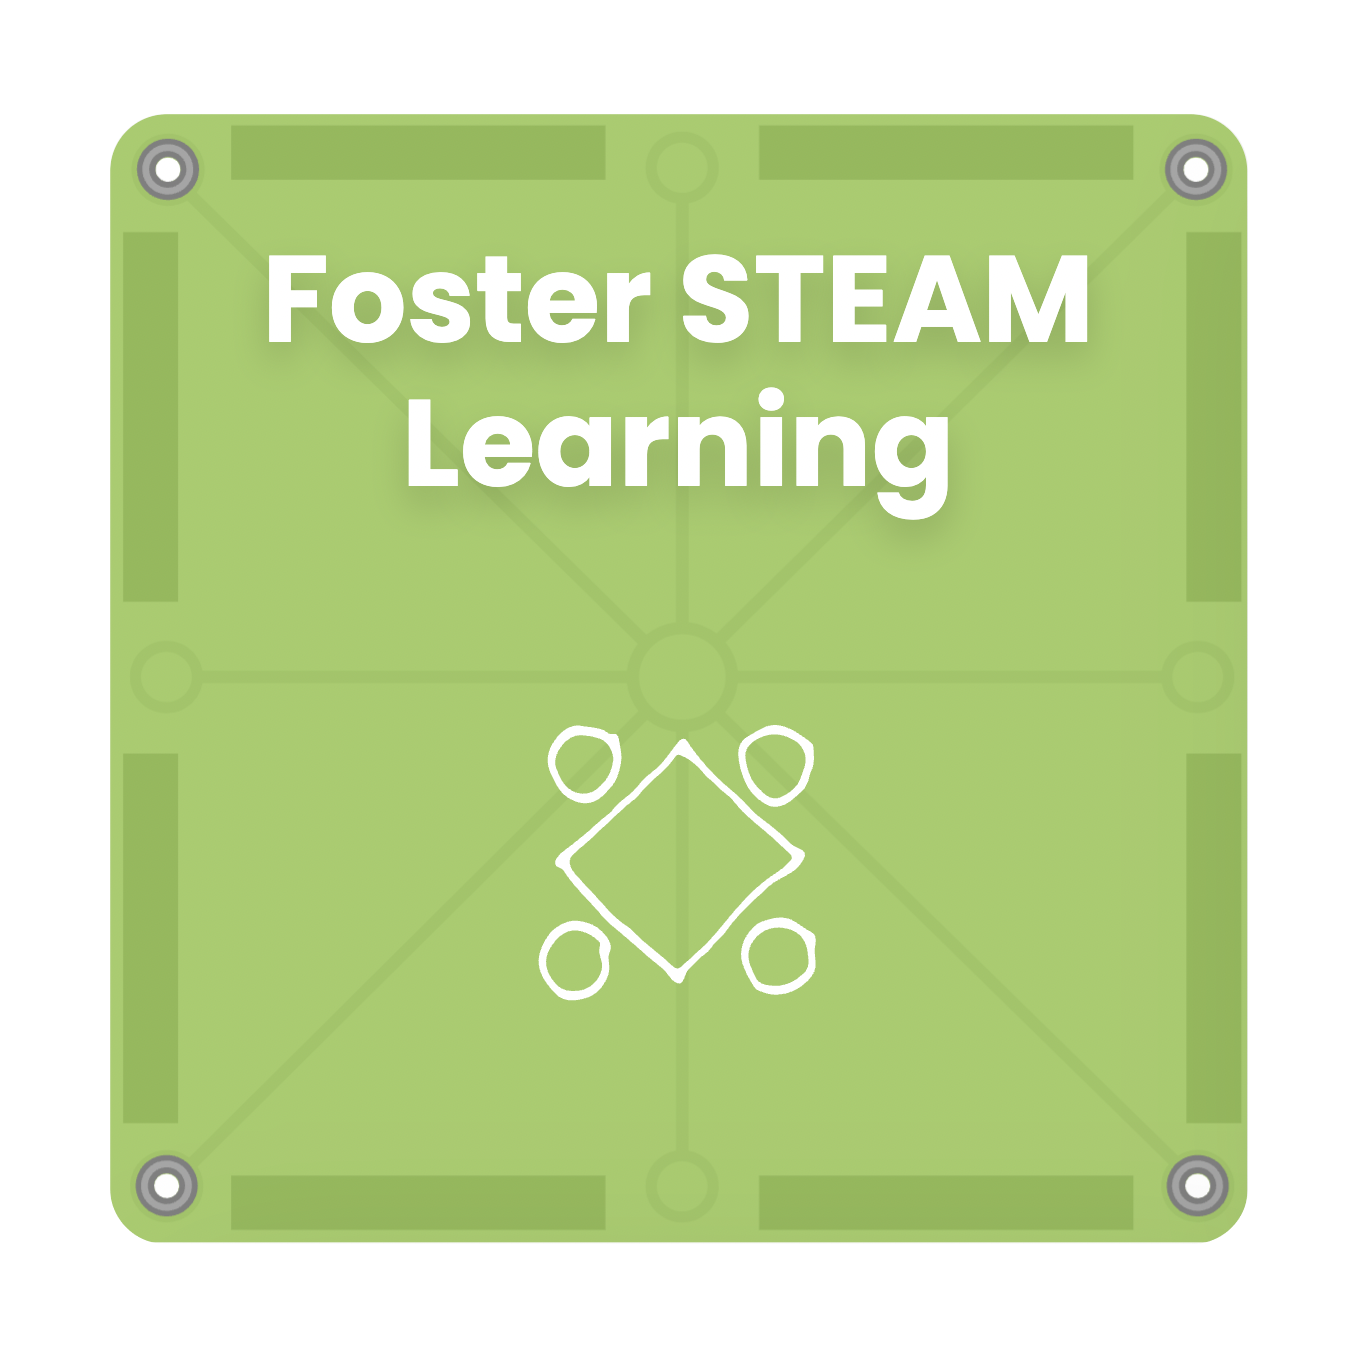 Foster STEAM Learning